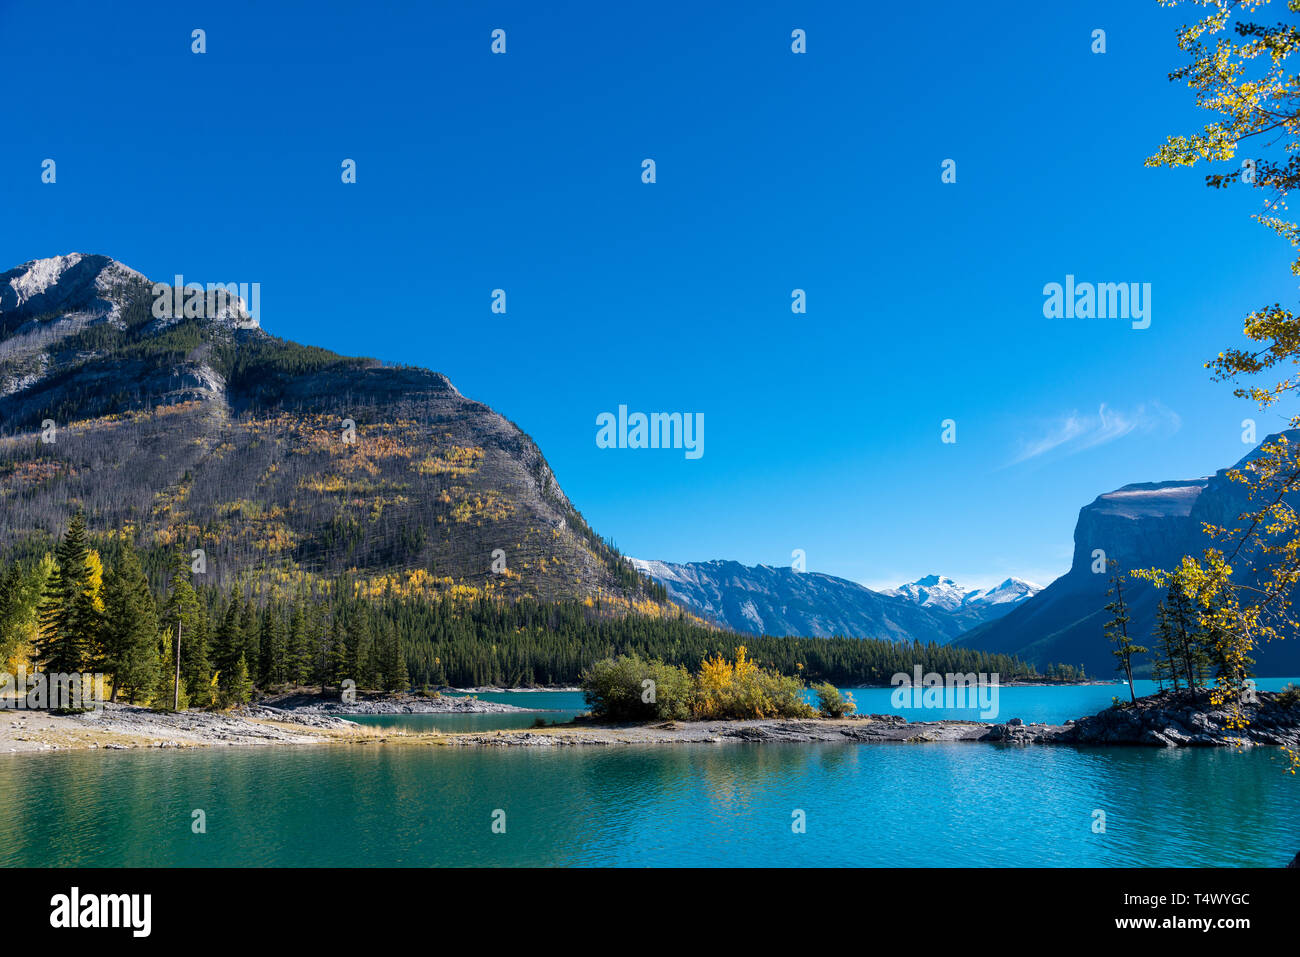 BANFF NATIONAL PARK, CANADA / SEPTEMBER 13, 2016:  A view across placid Lake Minnewanka in Banff National Park on a clear September morning. Stock Photo